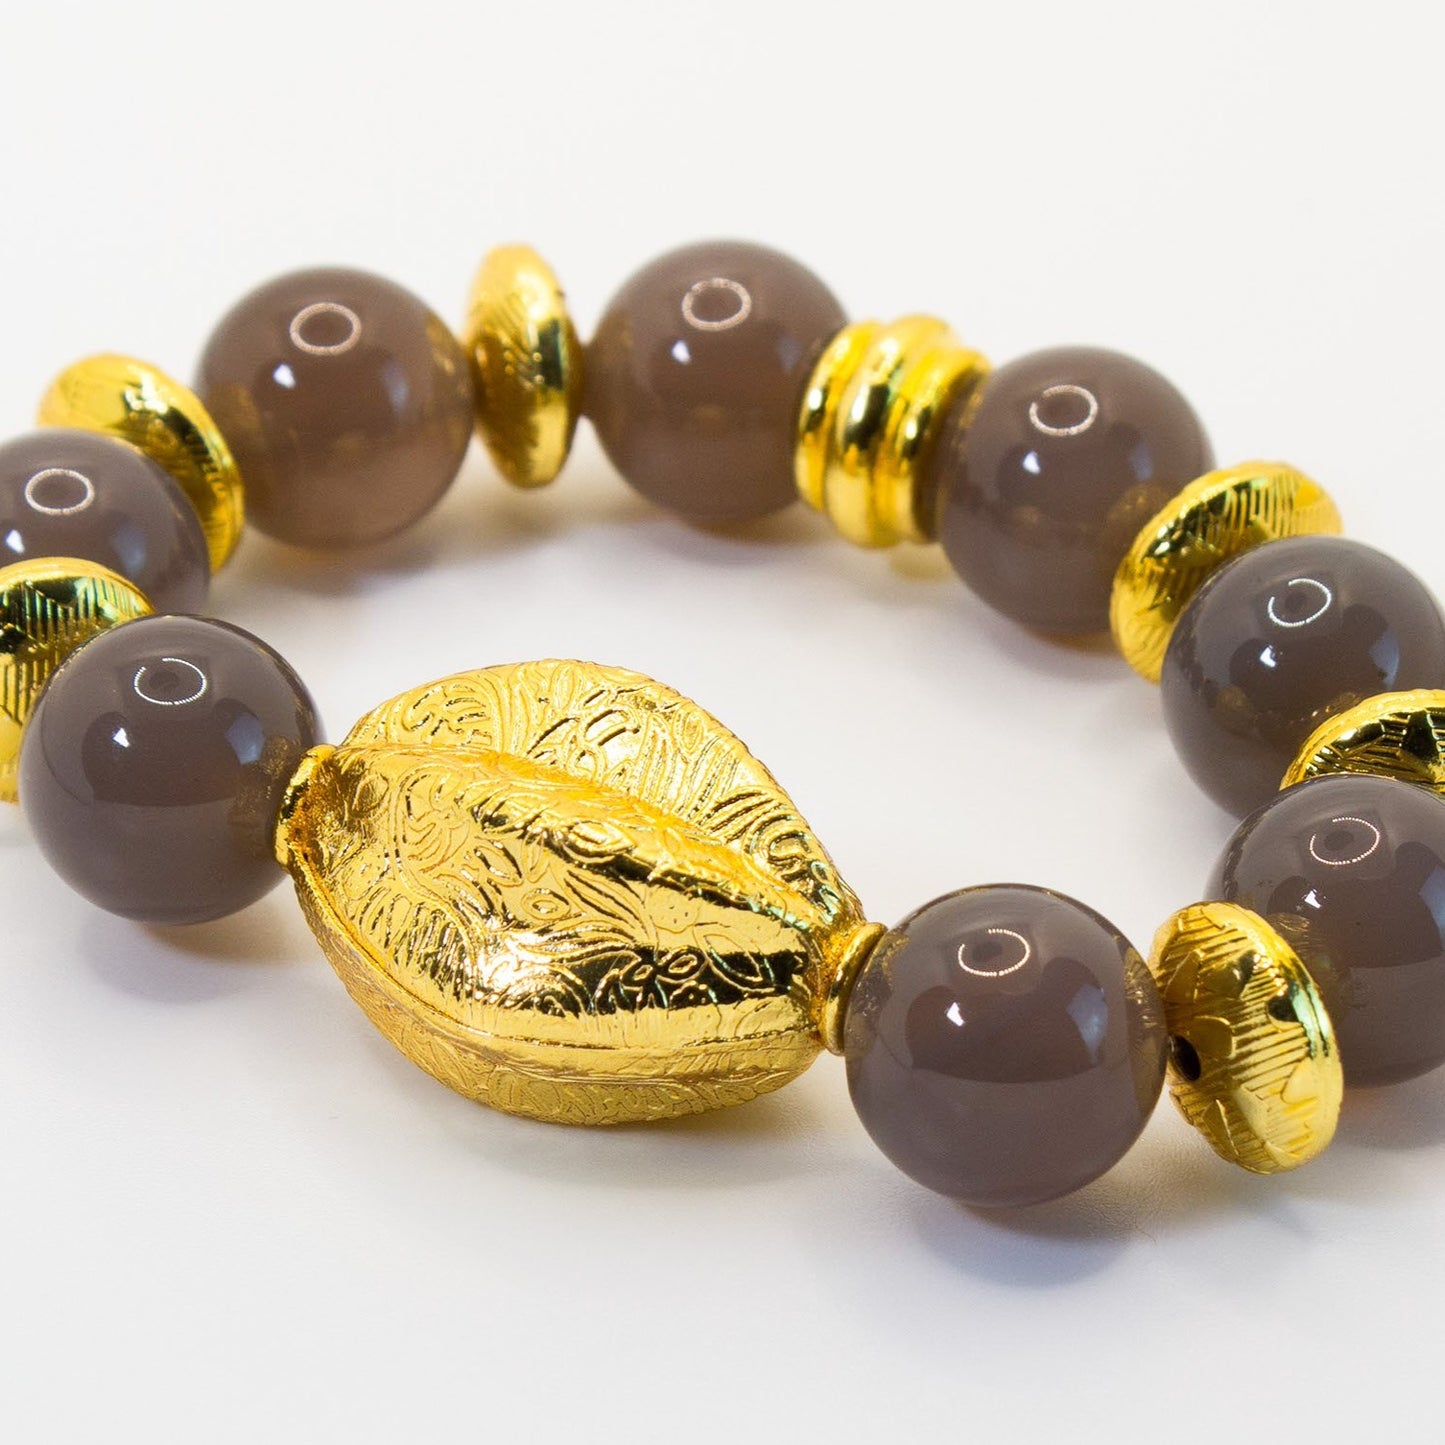 Large Grey Agate Gemstones Statement Bracelet Accented with 18k Gold Vermeil Melon-shaped Center Bead